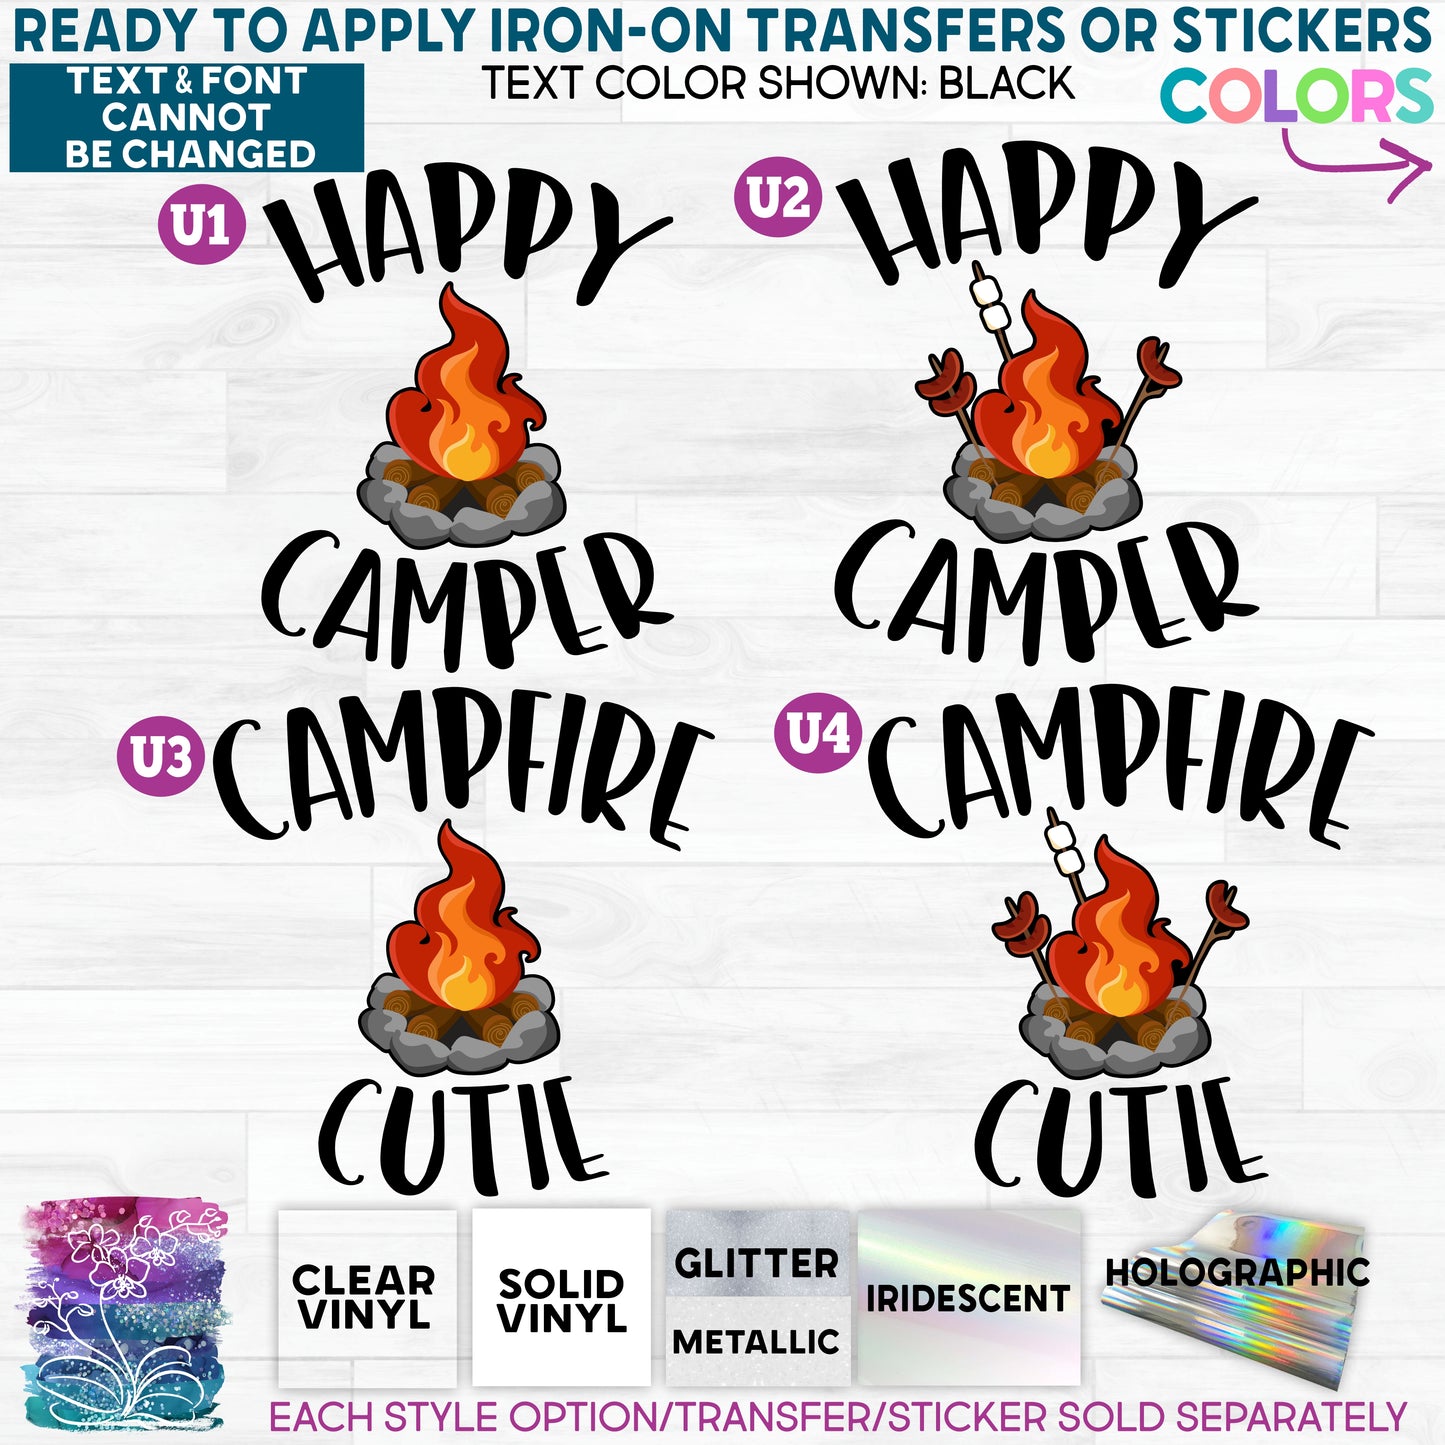 s228-6U Happy Camper Campfire Cutie Full Color Print Campfire Made-To-Order Iron-On Transfer or Sticker